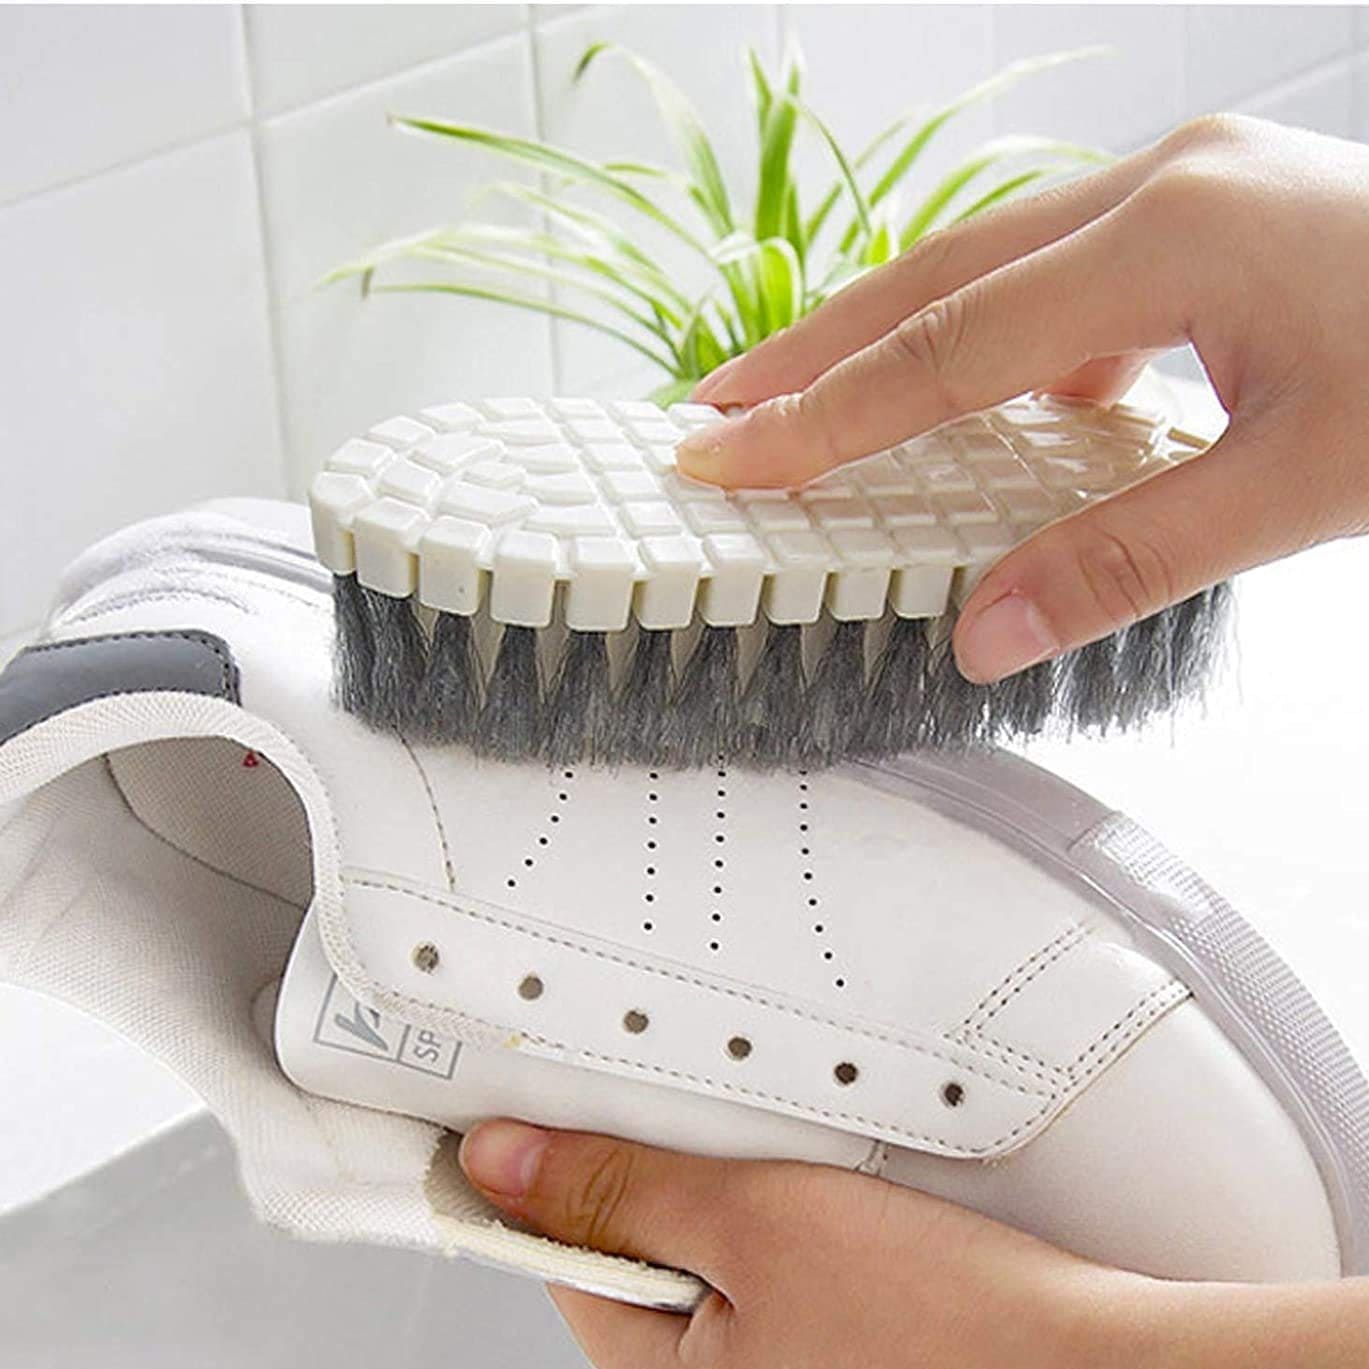 Bendable Sink Cleaning Brush, Multifunctional Flexible Laundry Cleaning Brush, Kitchen Pot Cleaner Brush, Home Kitchen Bathroom Cleaner Tool, Wall Ceramic Tile Floor Cleaning Brush